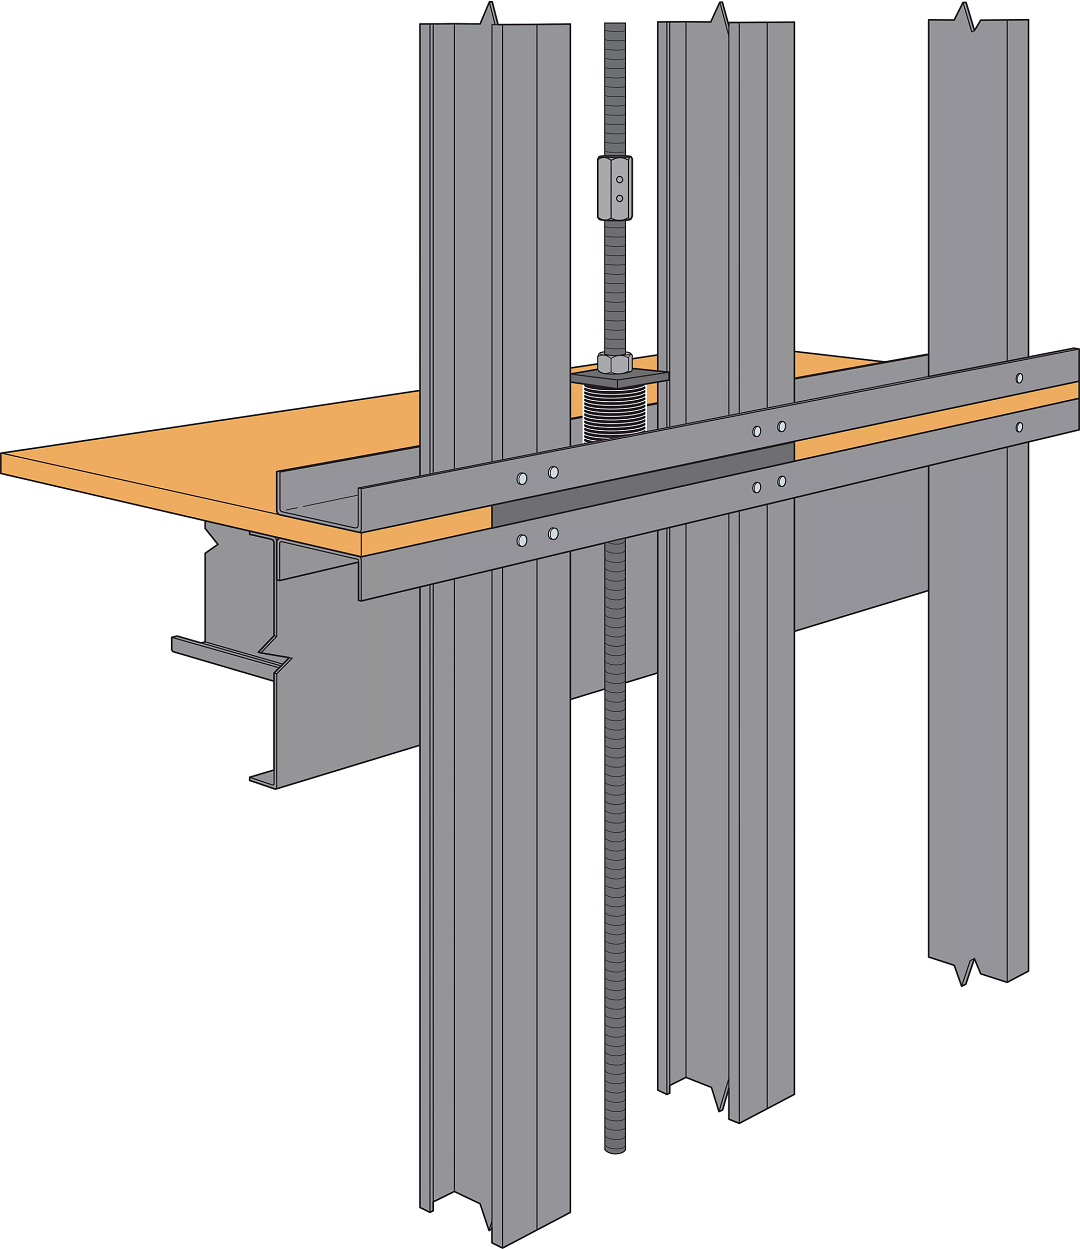 CFS ledger framing at continuous rod tie-down